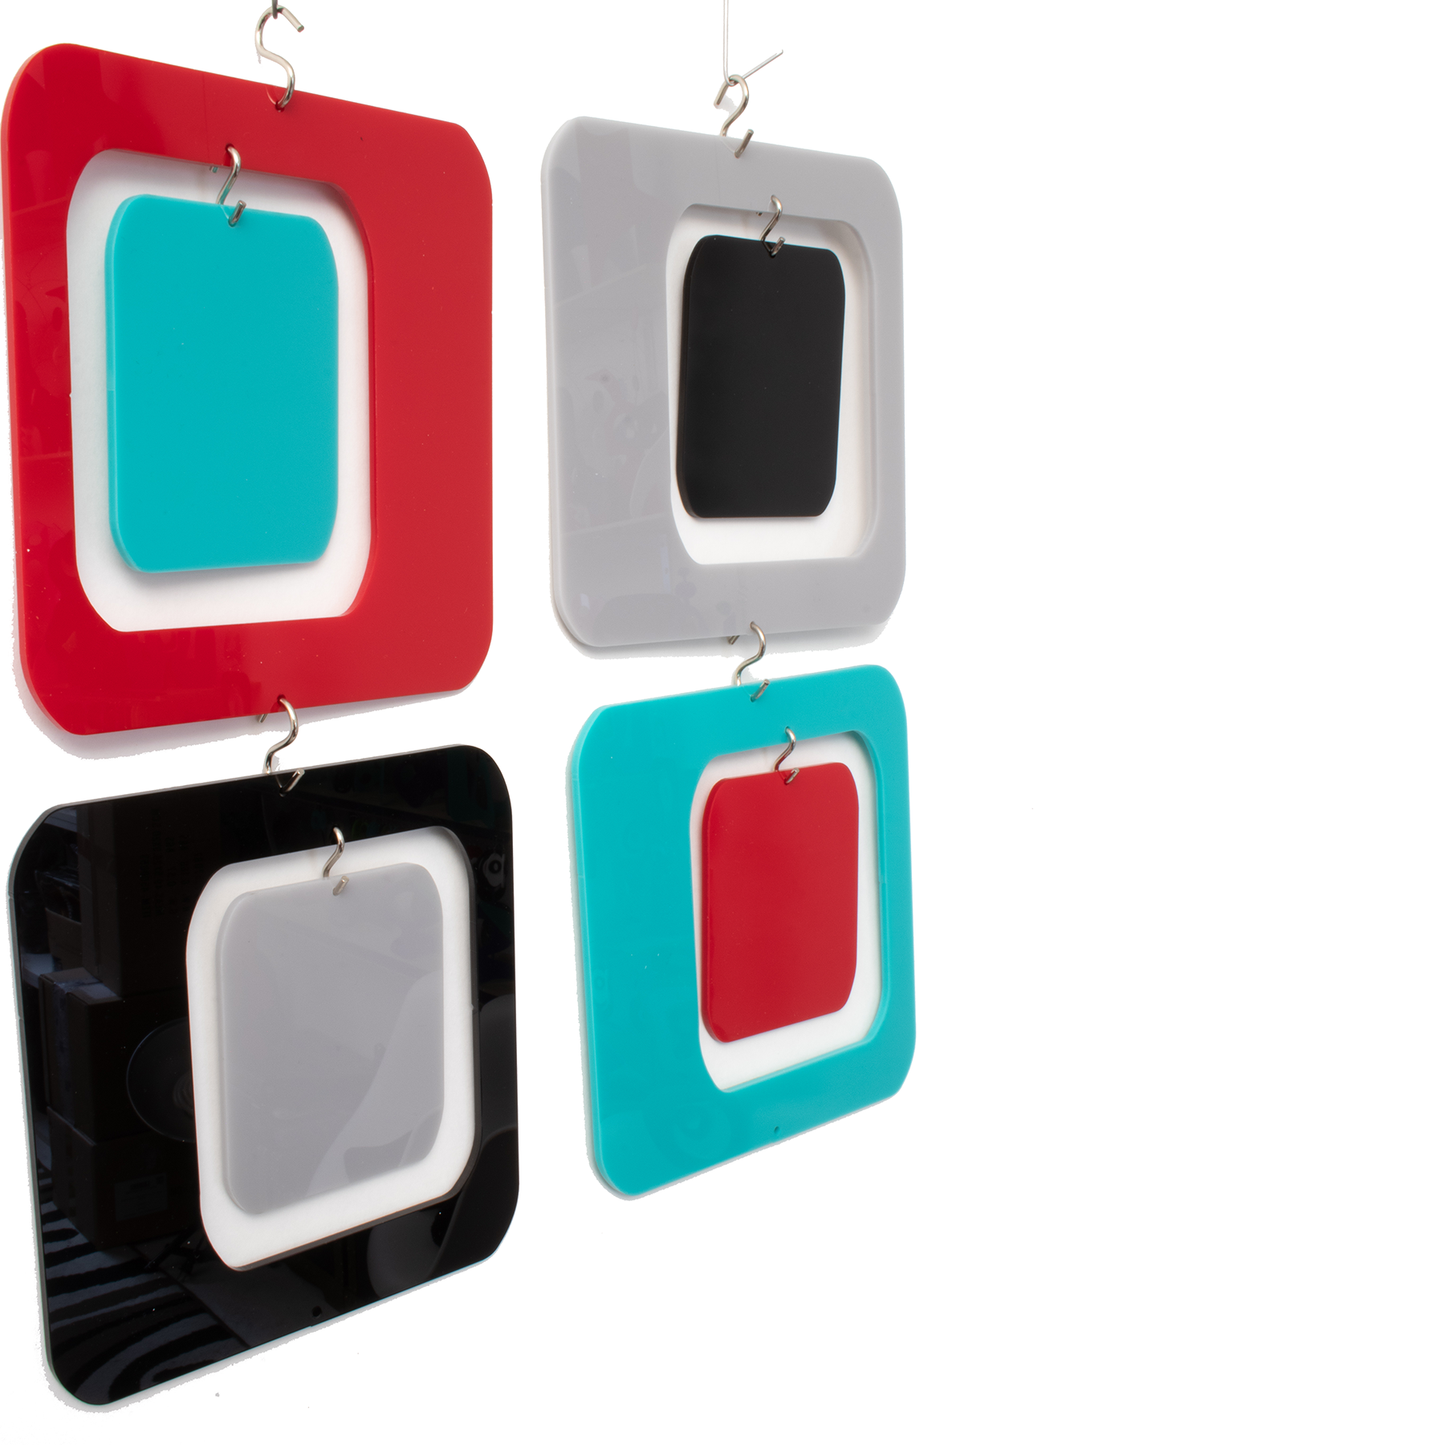 Coolsville 6" Square Retro Room Divider Screens Kit in multi colors by AtomicMobiles.com